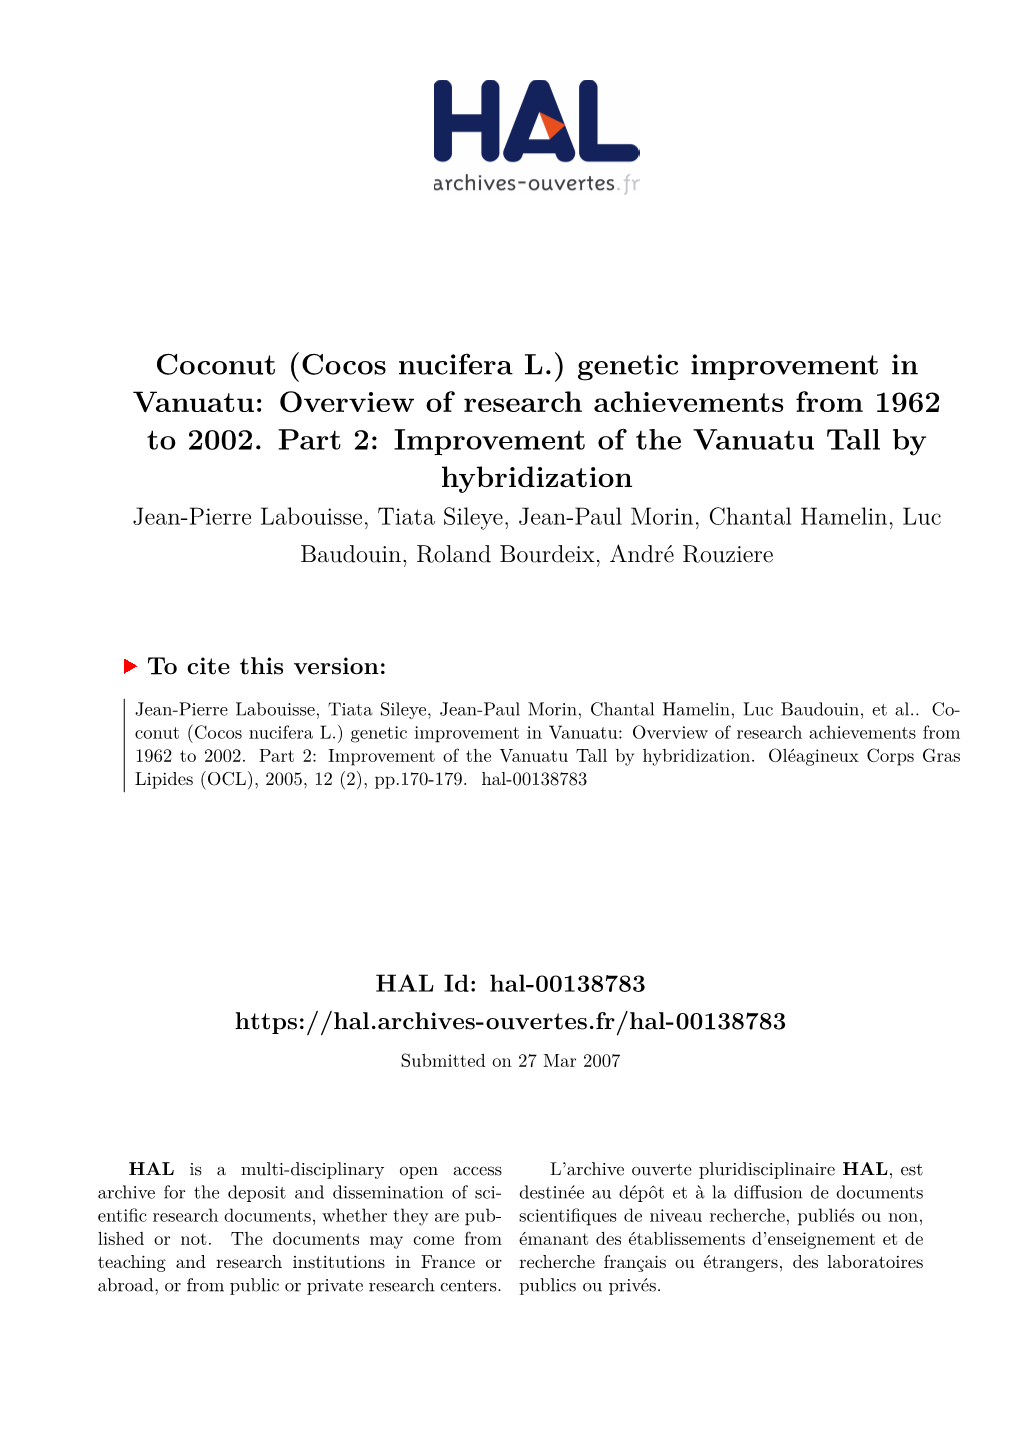 Coconut (Cocos Nucifera L.) Genetic Improvement in Vanuatu: Overview of Research Achievements from 1962 to 2002